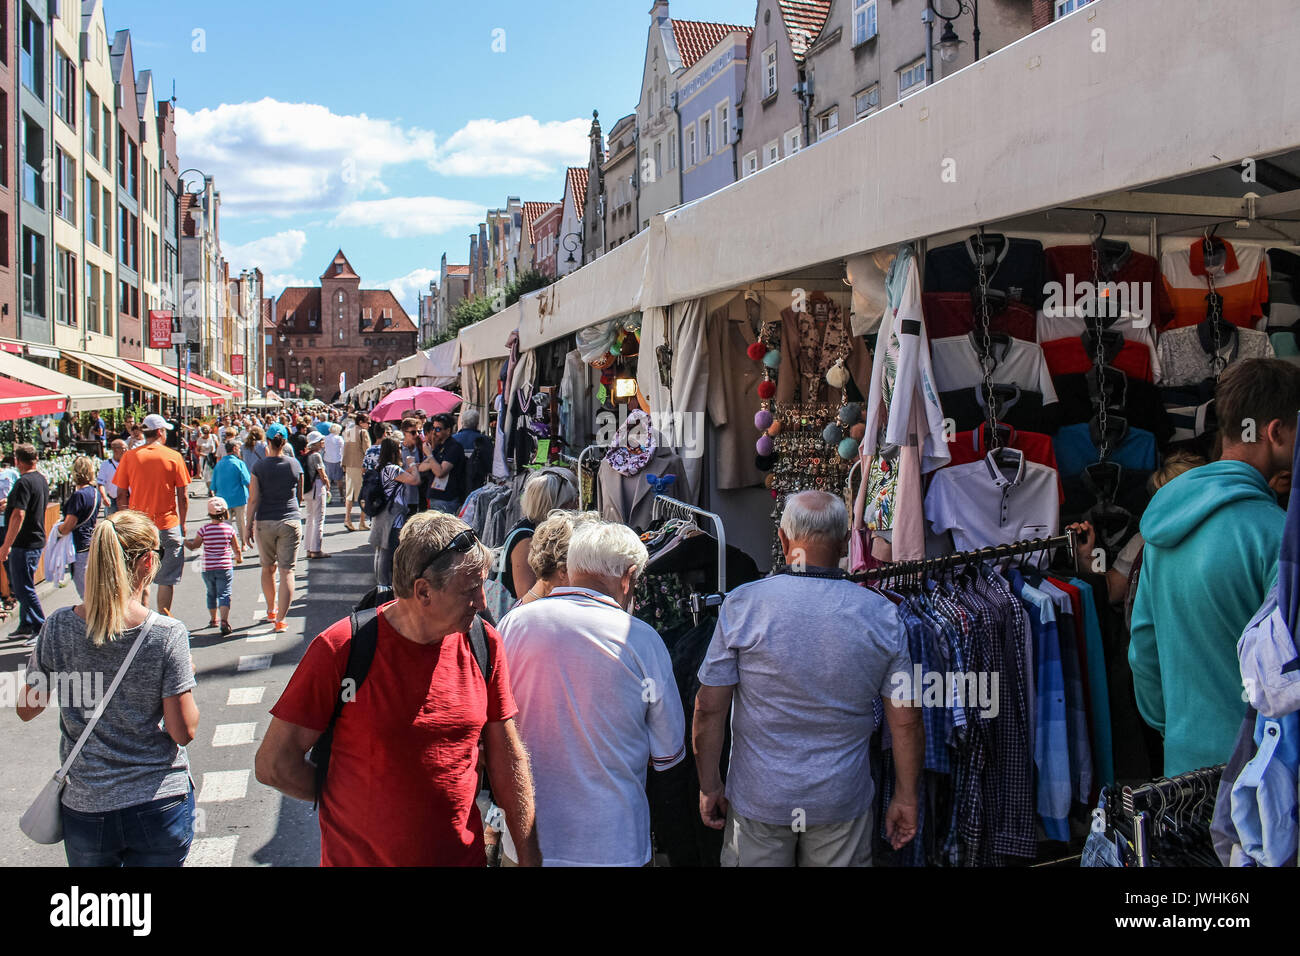 Gdansk, Poland. 13th August, 2017. People looking for goods at a flea market during 757th edition of St. Dominic’s Fair are seen in Gdansk, Poland on 13 August 2017  More than one thousand 1000 traders, artists and collectors participate in the Fair occupying with their stands several streets in the centre of the in the historical city centre. St. Dominic’s Fair is the largest open-air trade and cultural event in Poland and one of the largest such events in Europe. It has enjoyed over seven hundred fifty years of tradition; it was established by the Pope Alexander IV in 1260. Stock Photo